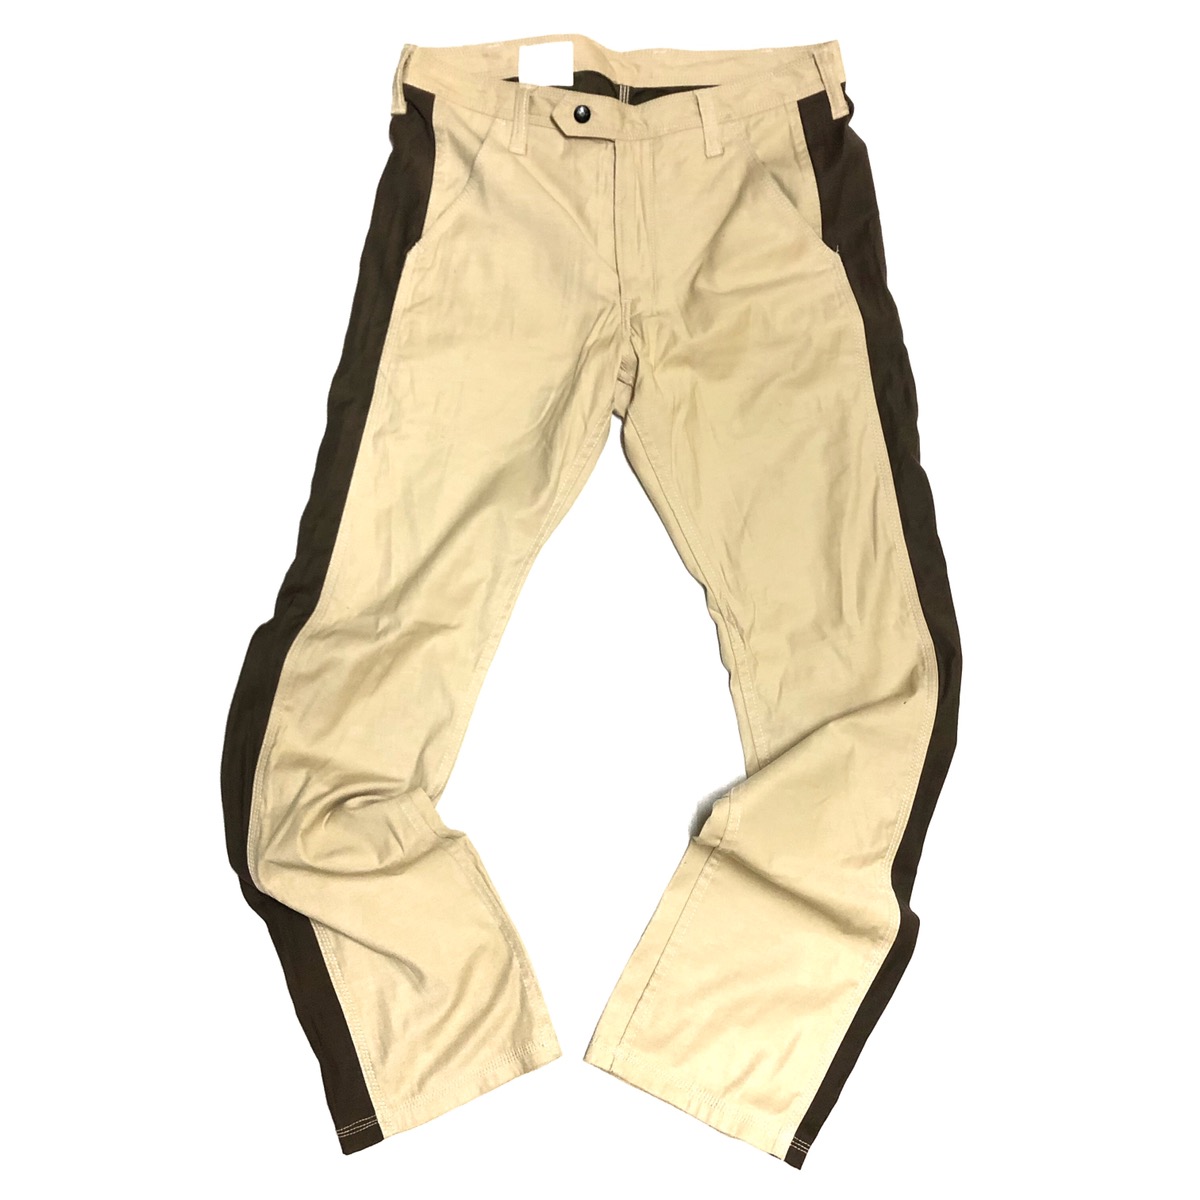 White Mountaineering side strape pants - 1